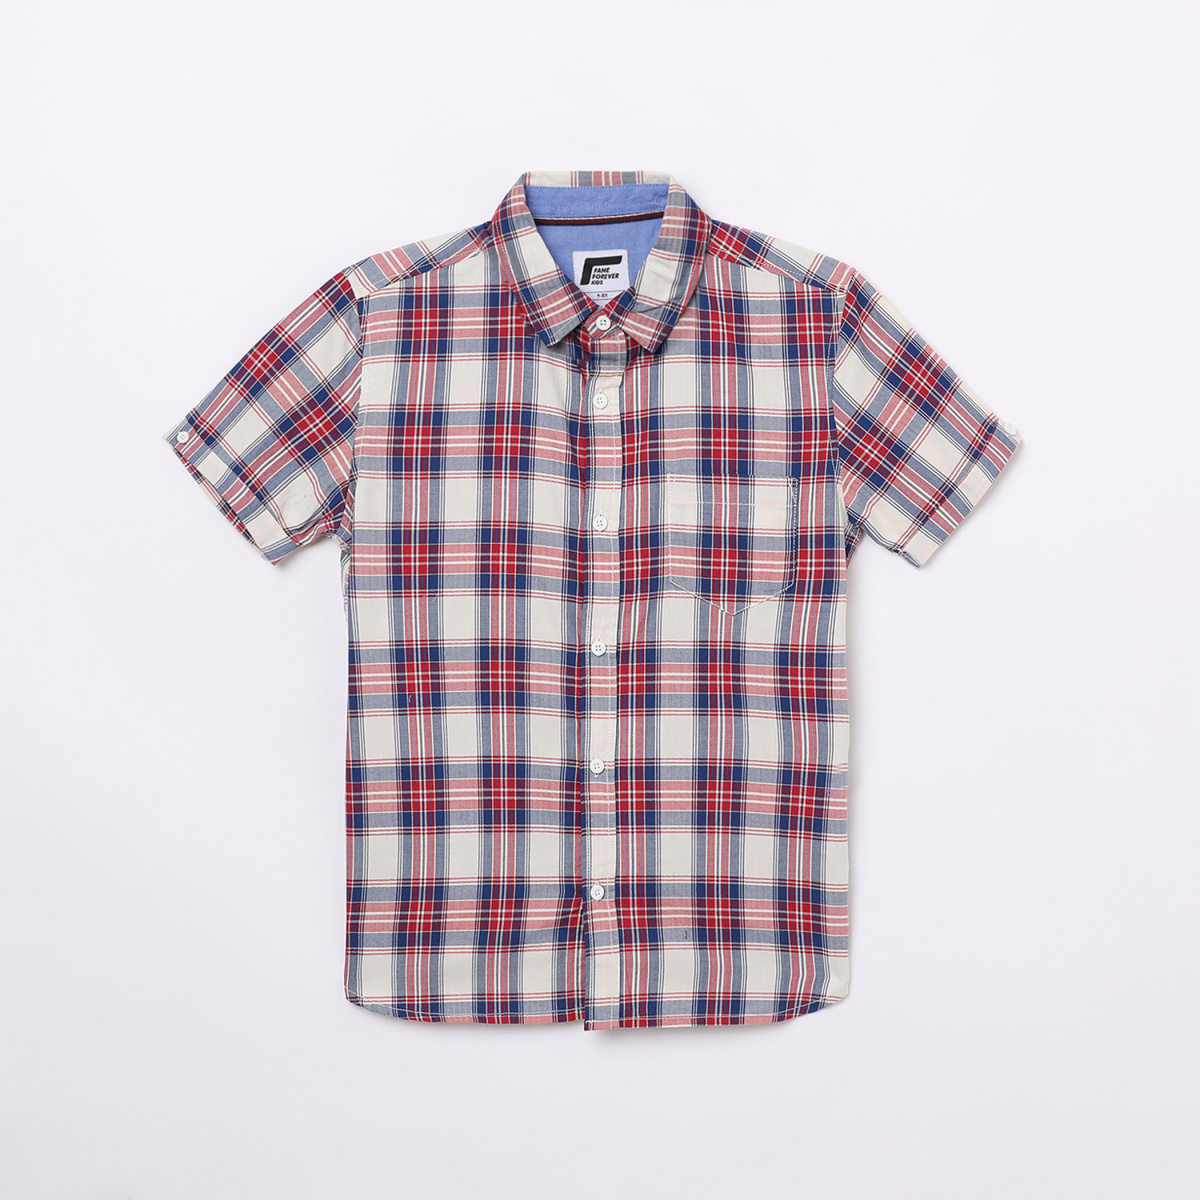 FAME FOREVER YOUNG Boys Checked Regular Fit Shirt